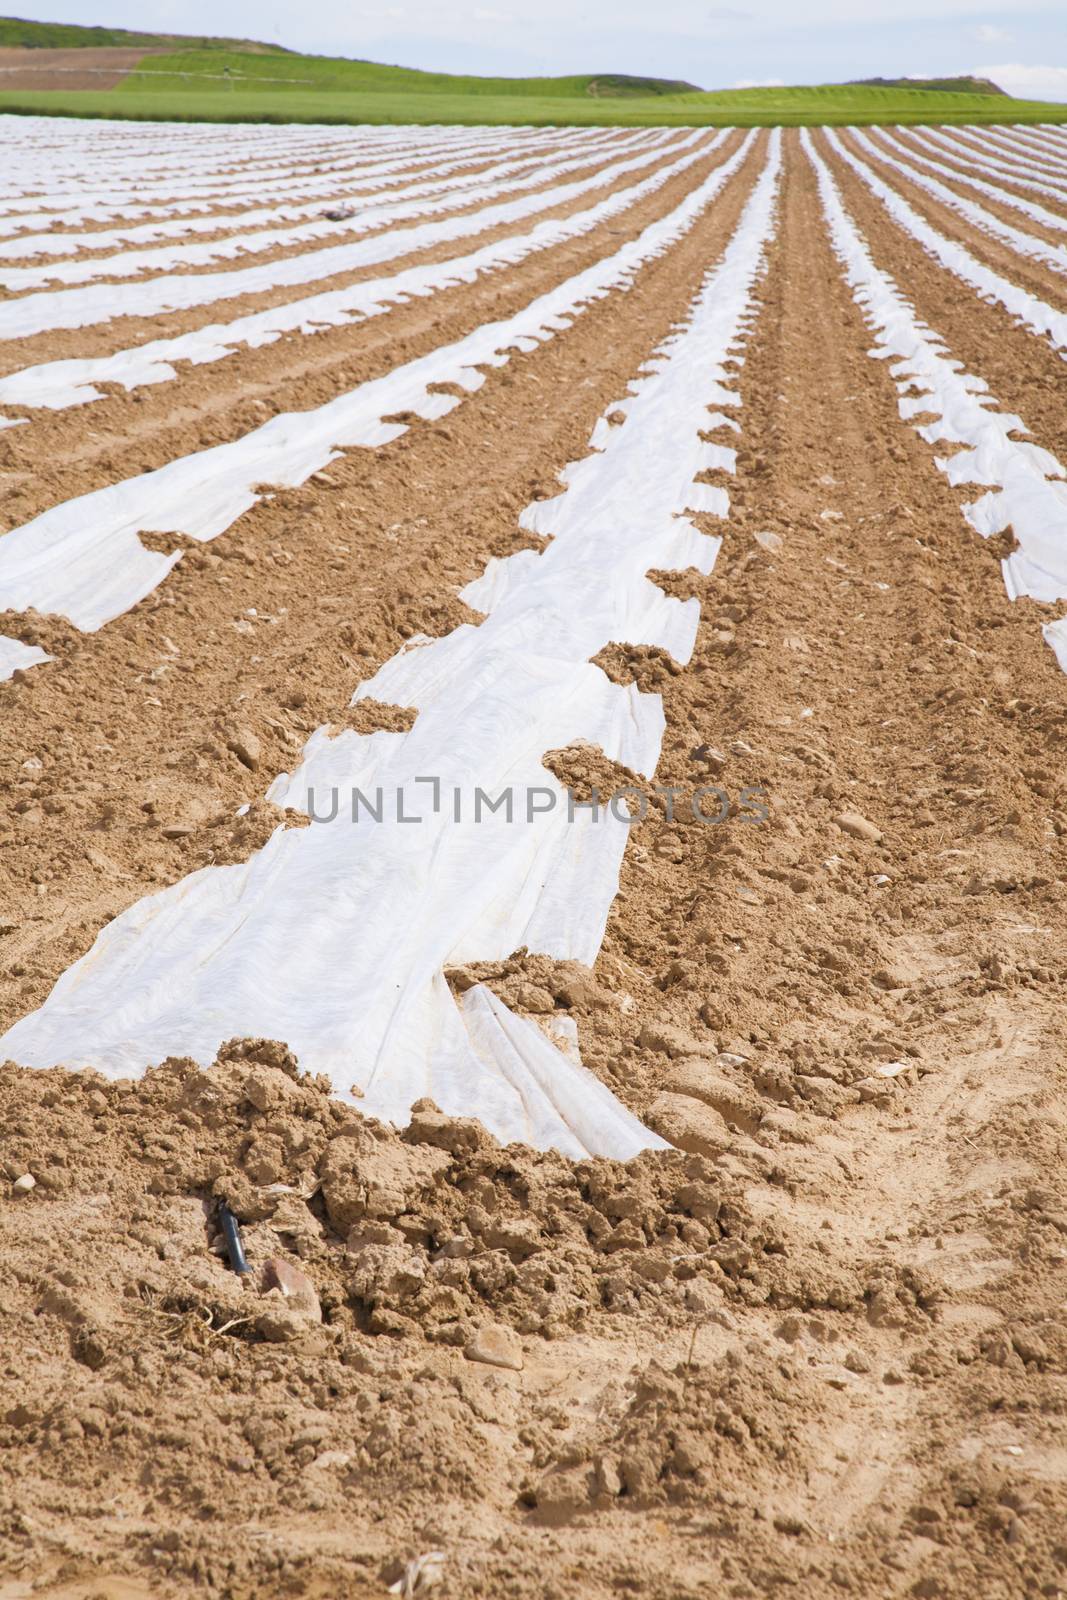 cultivation with plastic on ground in a landscape of Spain